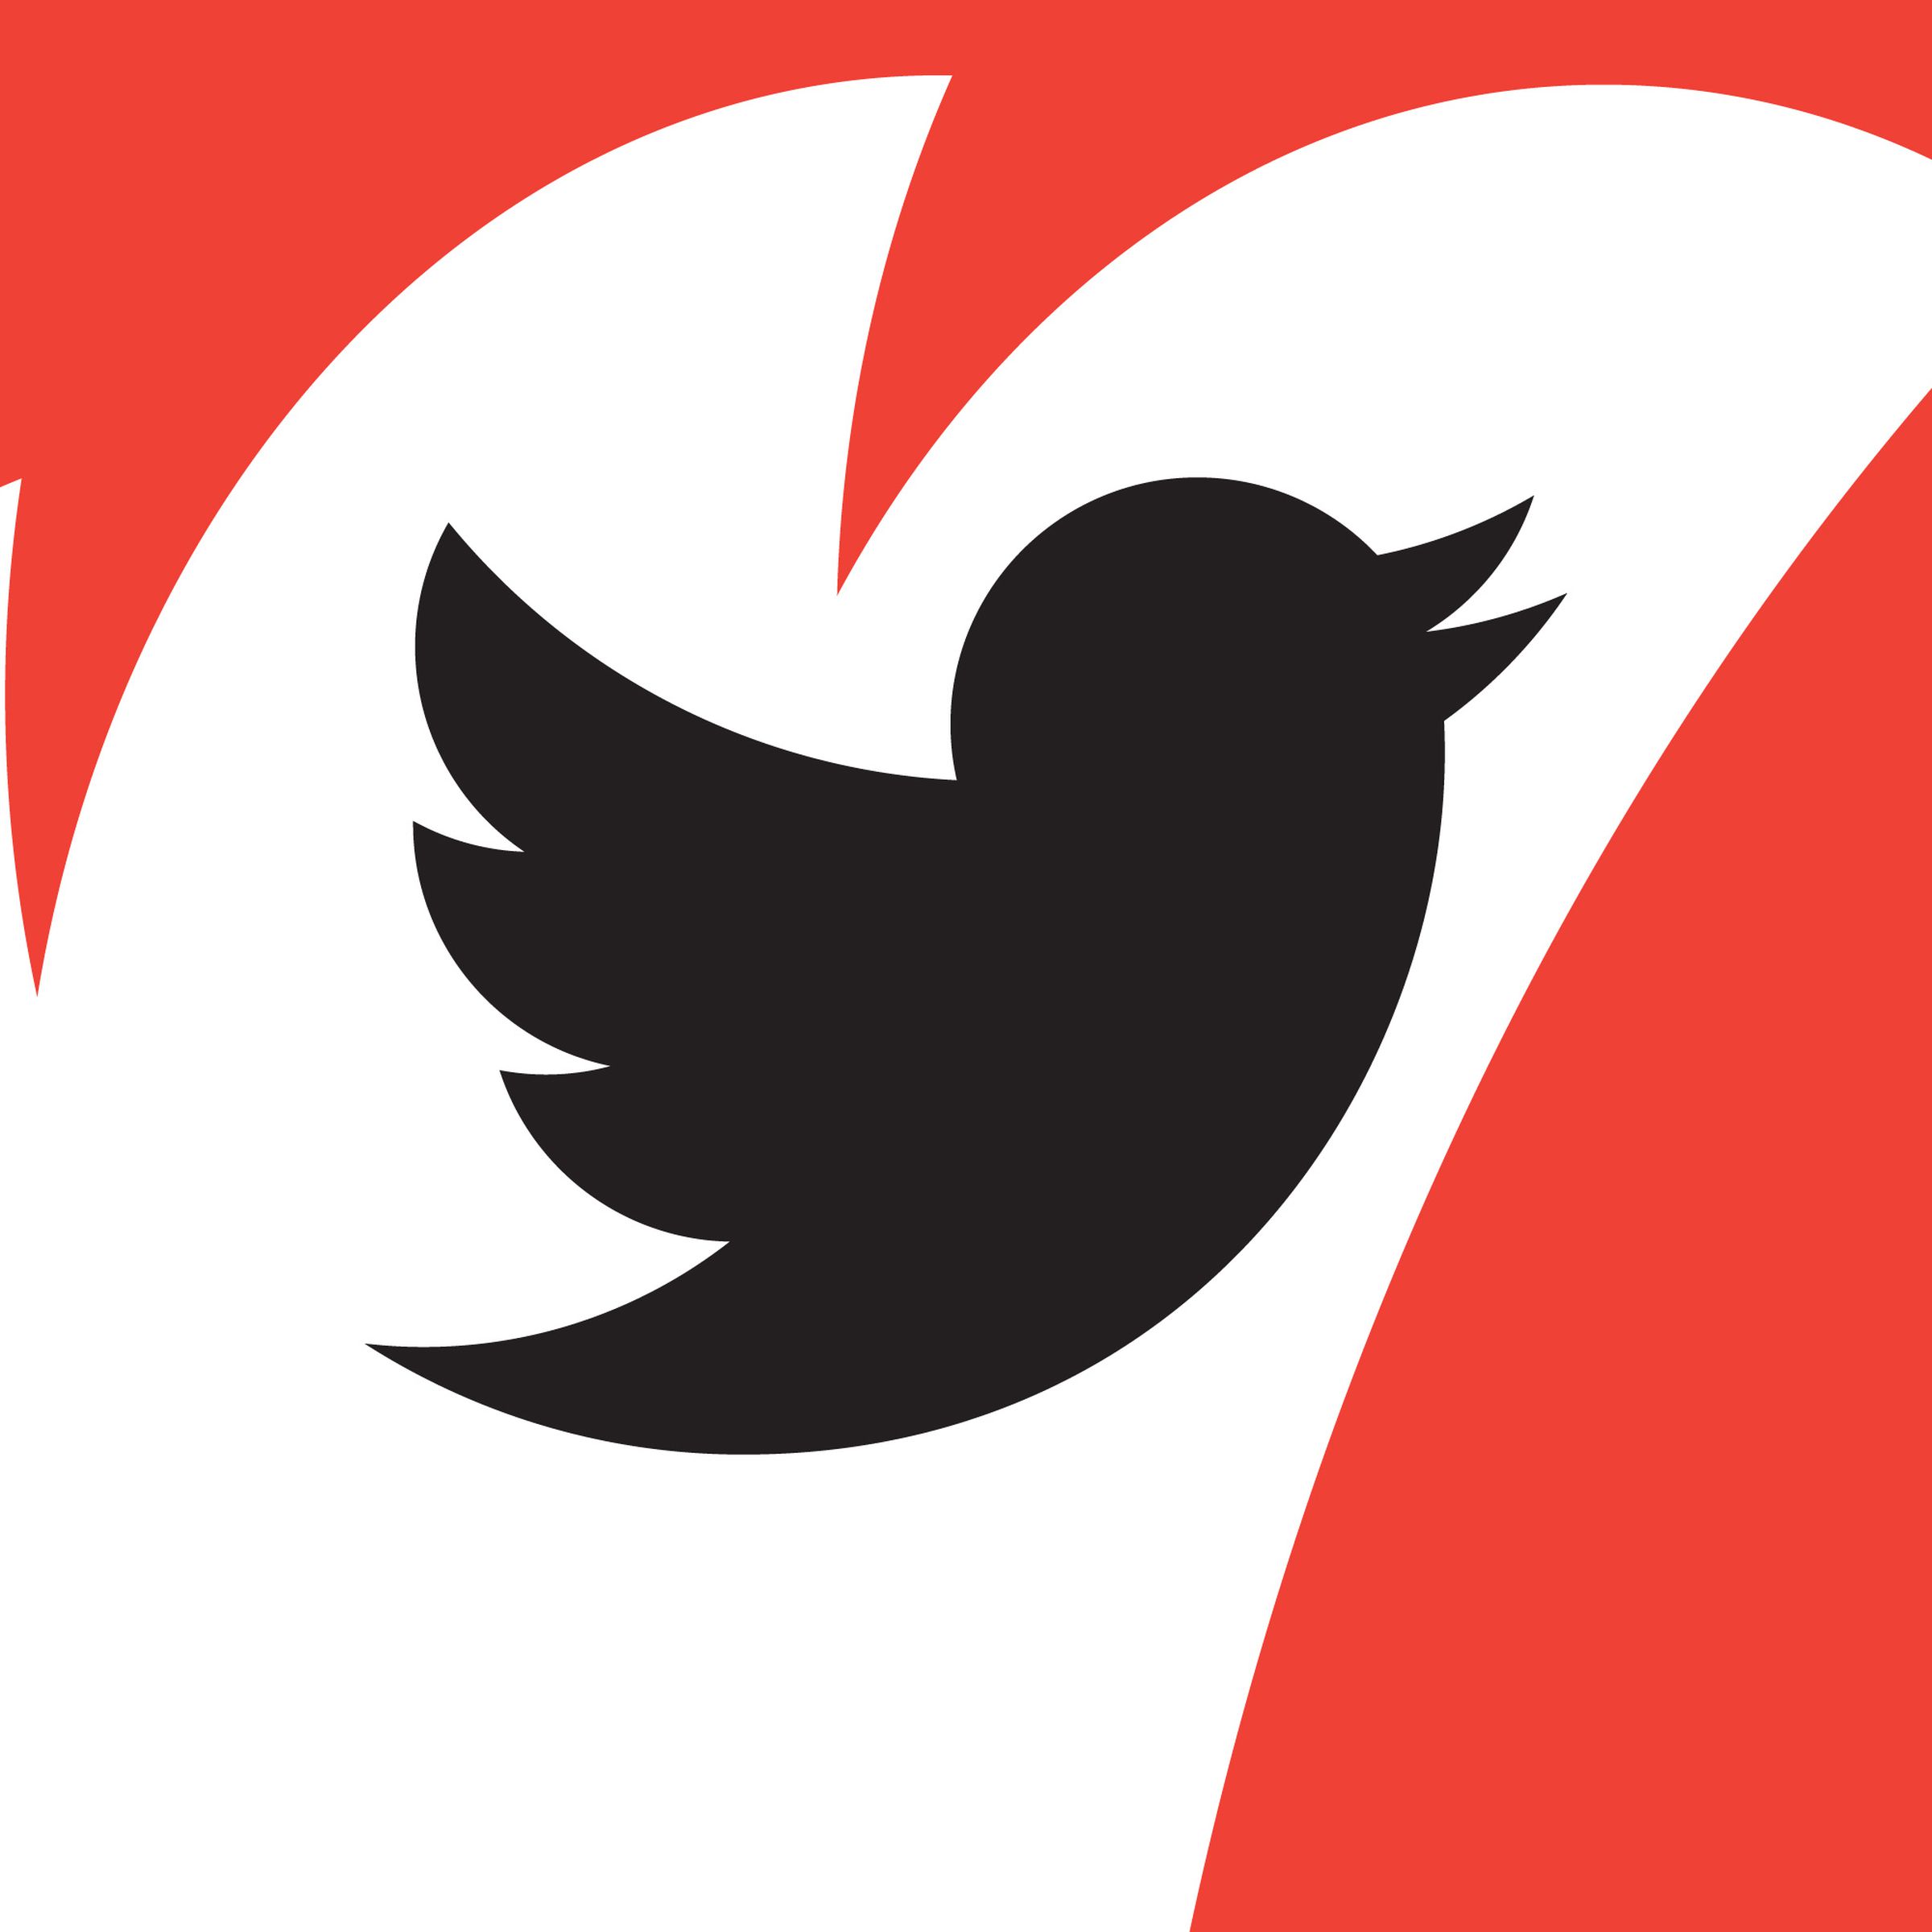 Illustration of a black Twitter bird in front of a red and white background.